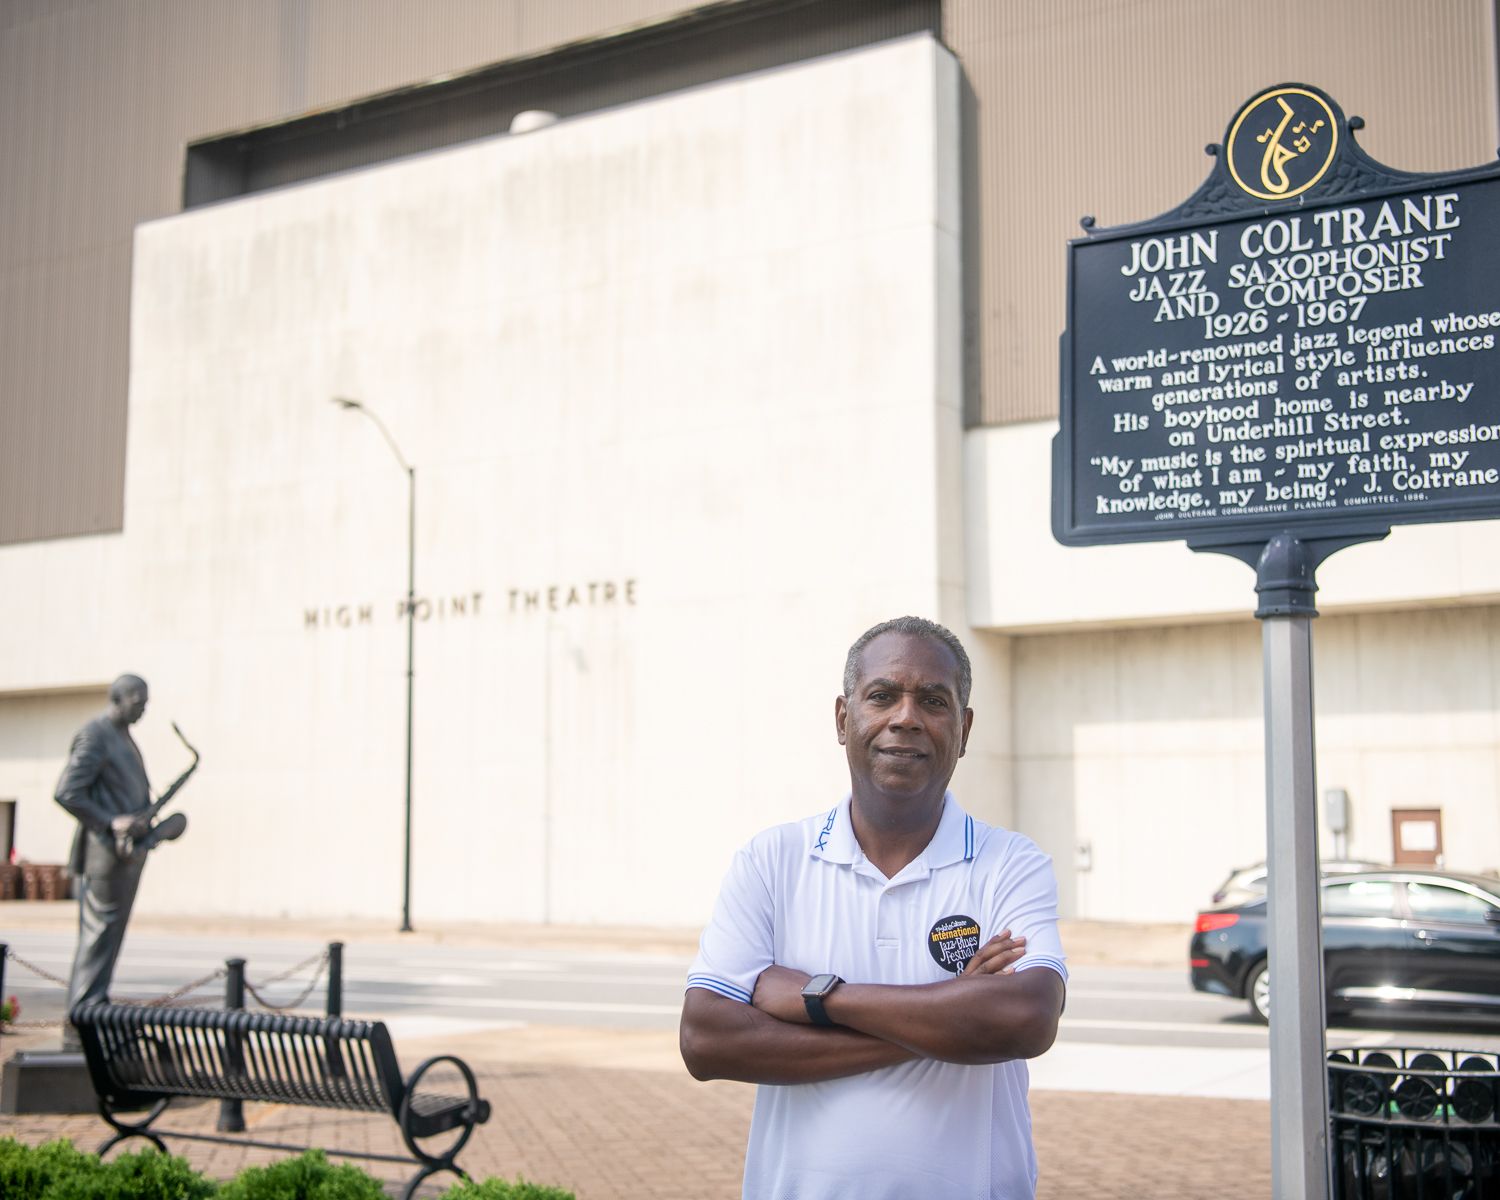 Joe Williams stands in front of John Coltrane's statue in High Point, NC.